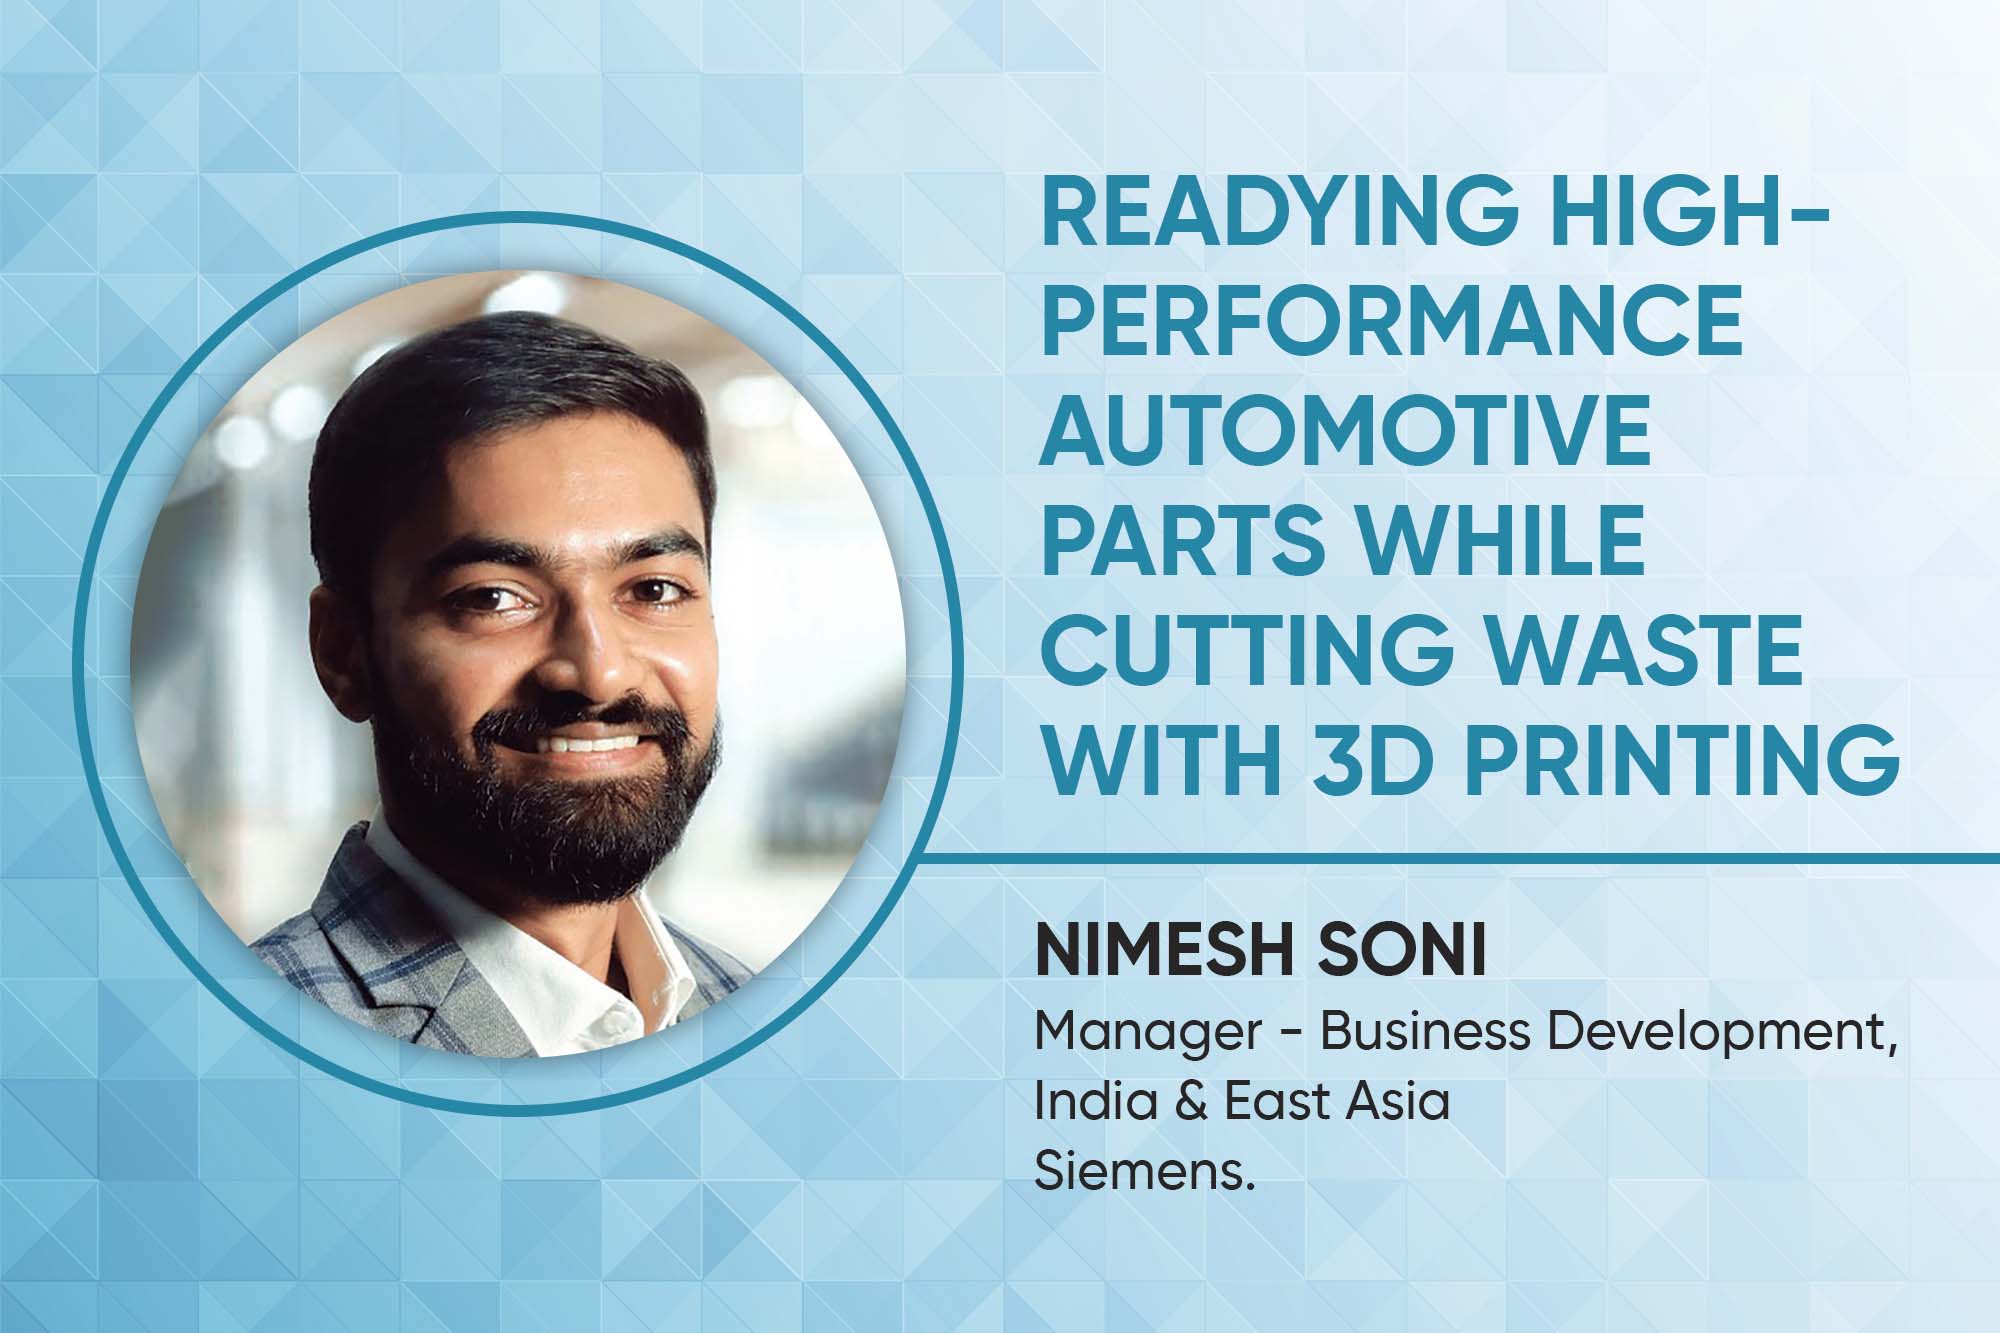 Readying high-performance automotive parts while cutting waste with 3D printing